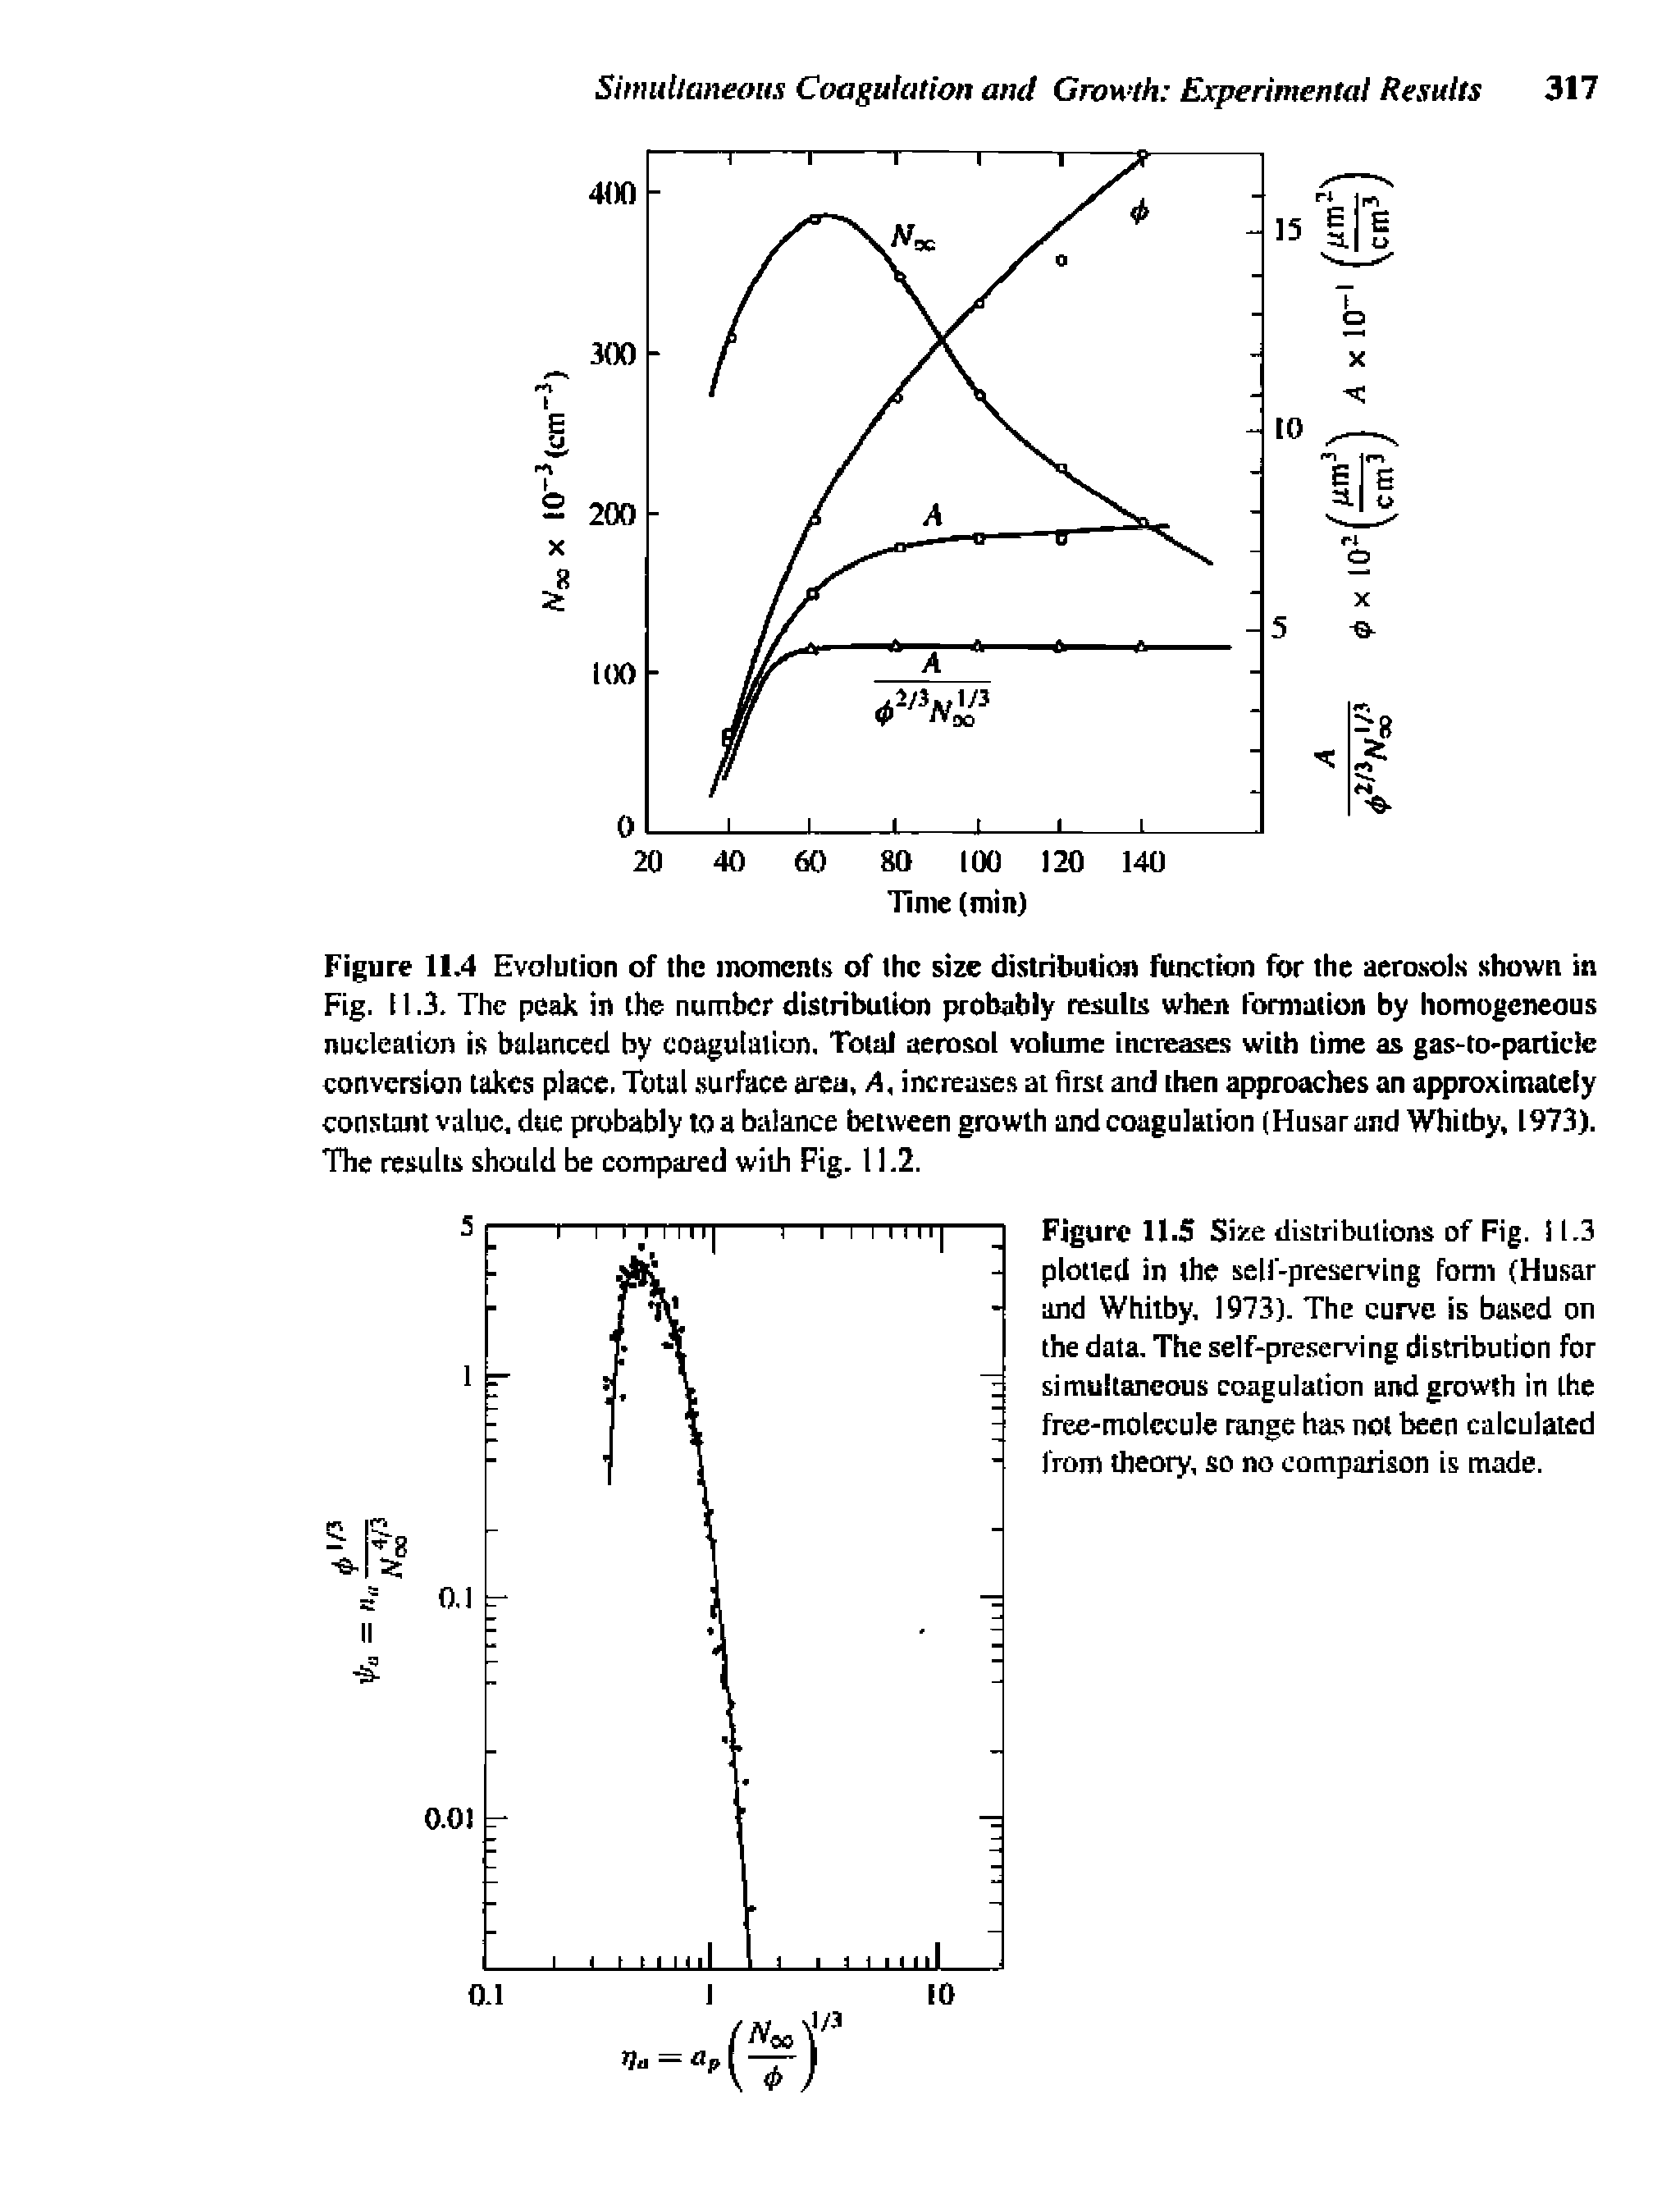 Figure 11.5 Size distributions of Fig. 11.3 plotted in the self-preserving form (Husar and Whitby, 1973). The curve is based on the data. The self-preserving distribution for simultaneous coagulation and growth in the free-molecule range has not been calculated from theory, so no comparison is made.